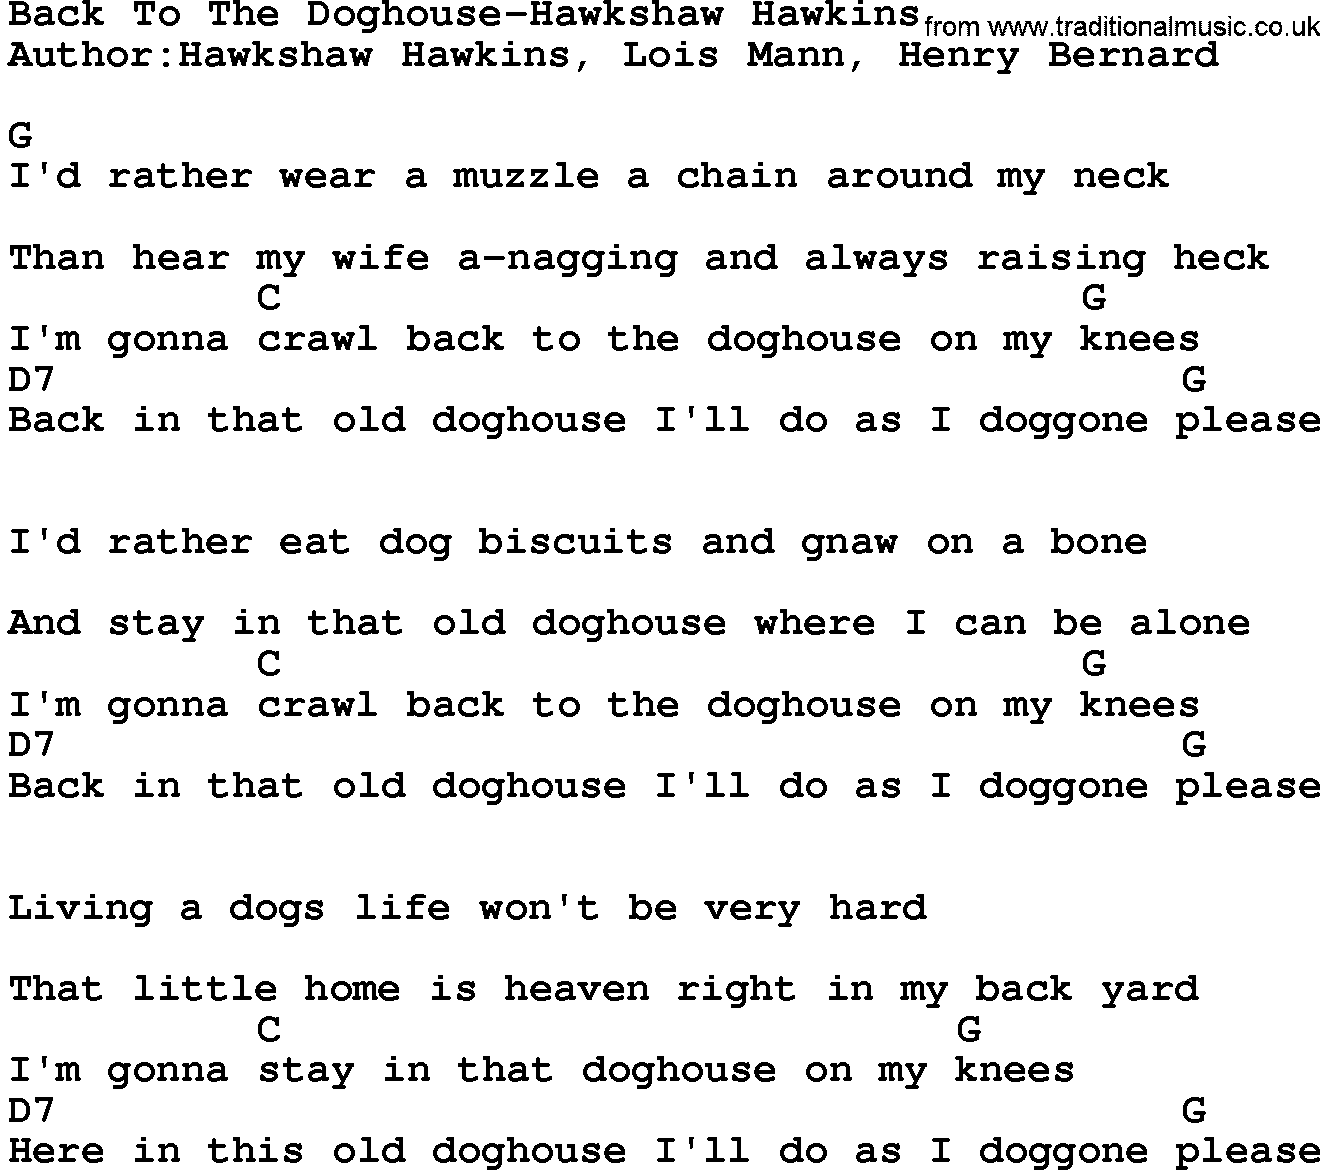 Country music song: Back To The Doghouse-Hawkshaw Hawkins lyrics and chords